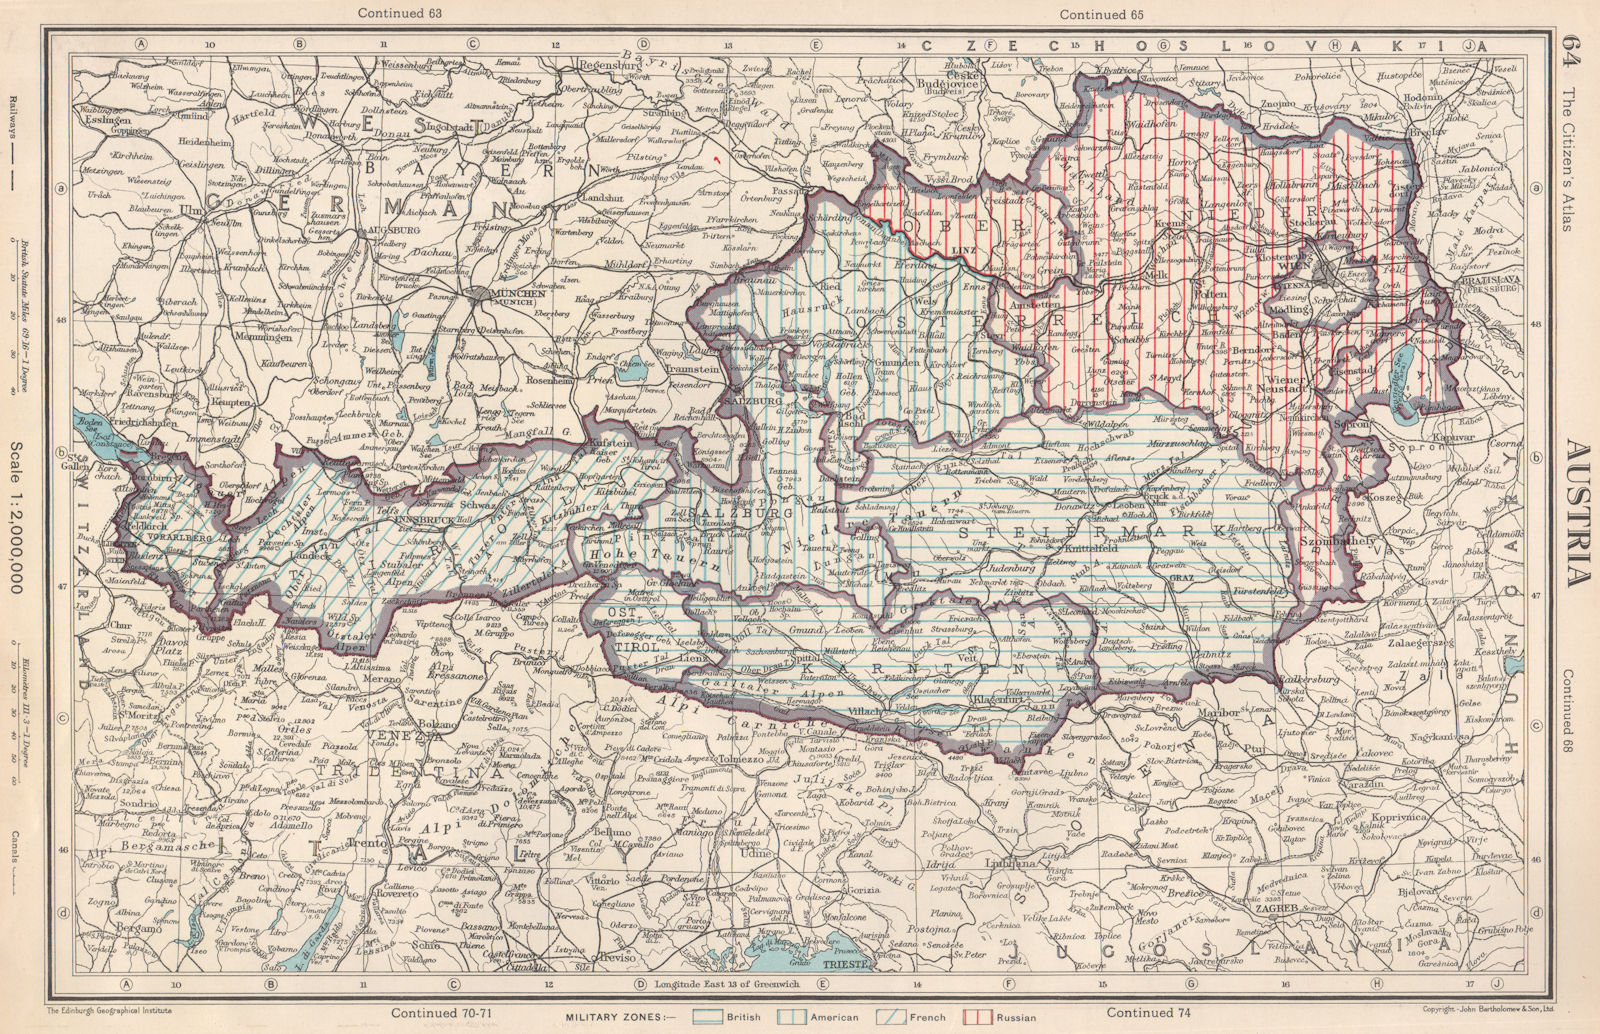 AUSTRIA. showing post WW2 military zones. British US French Russian 1952 map